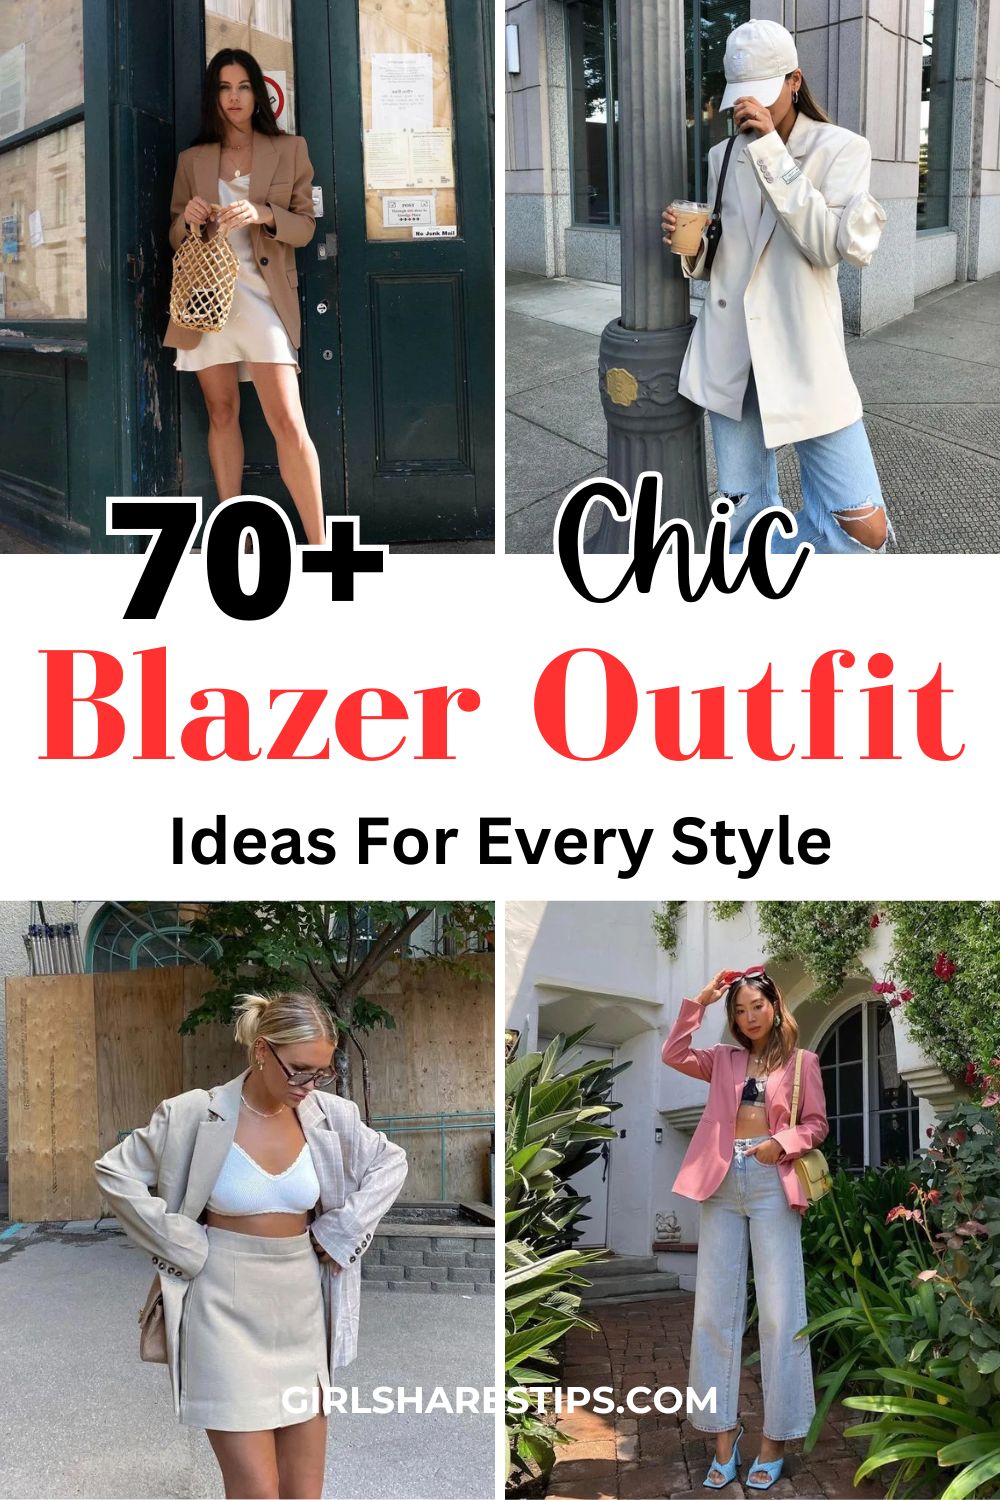 blazer outfit ideas collage